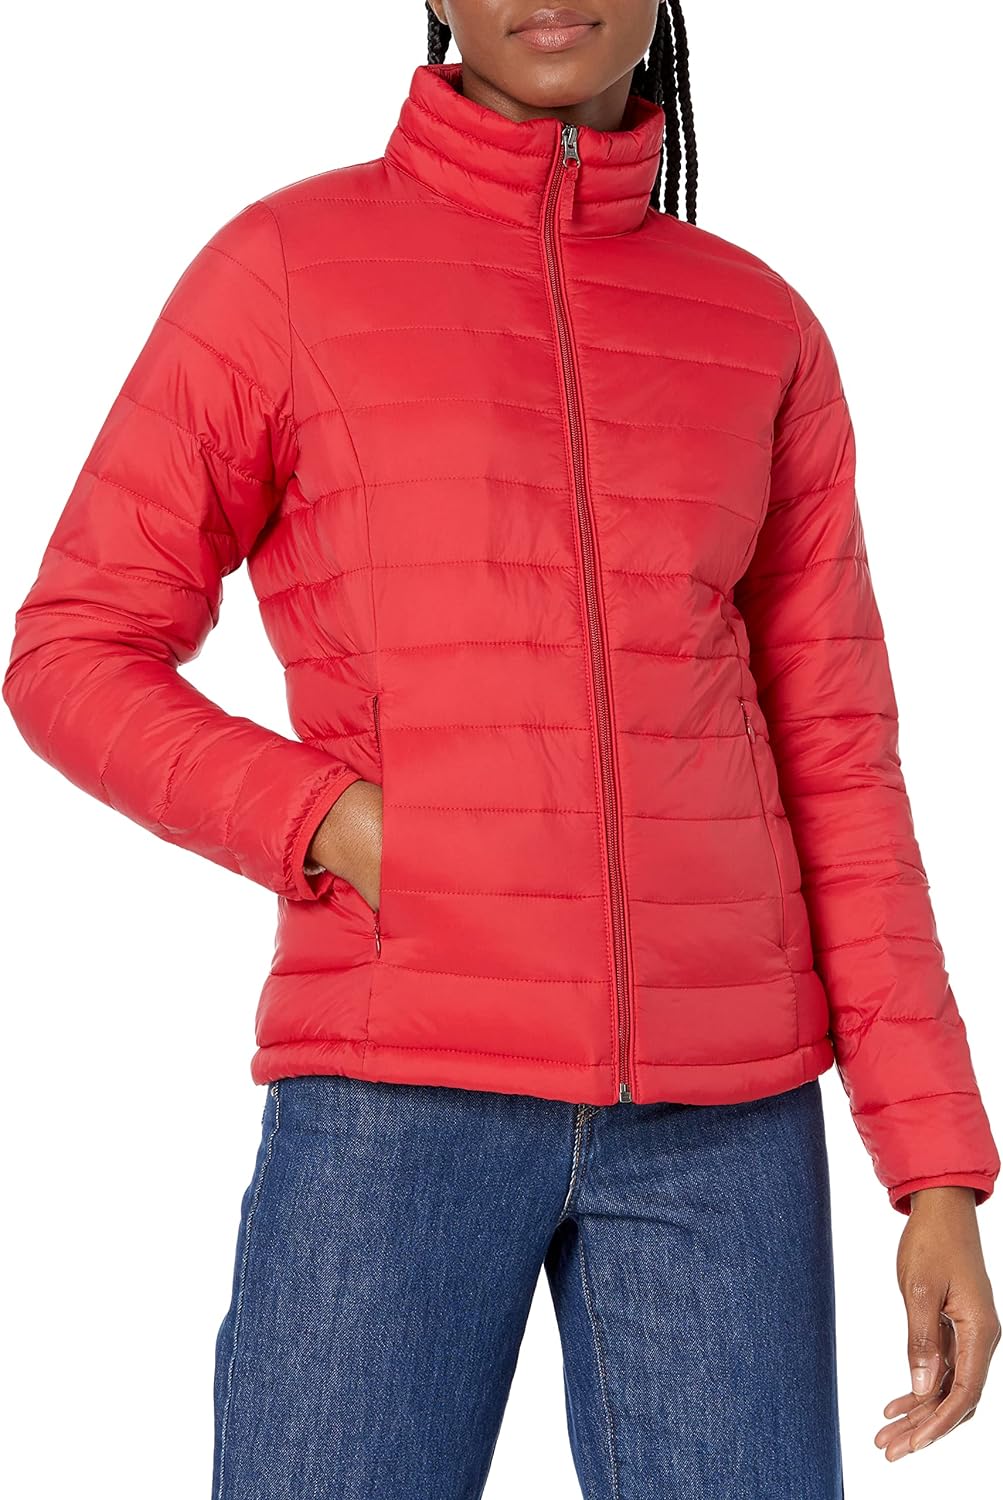 Amazon Essentials Women’s Lightweight Long-Sleeve Water-Resistant Packable Puffer Jacket (Available in Plus Size)